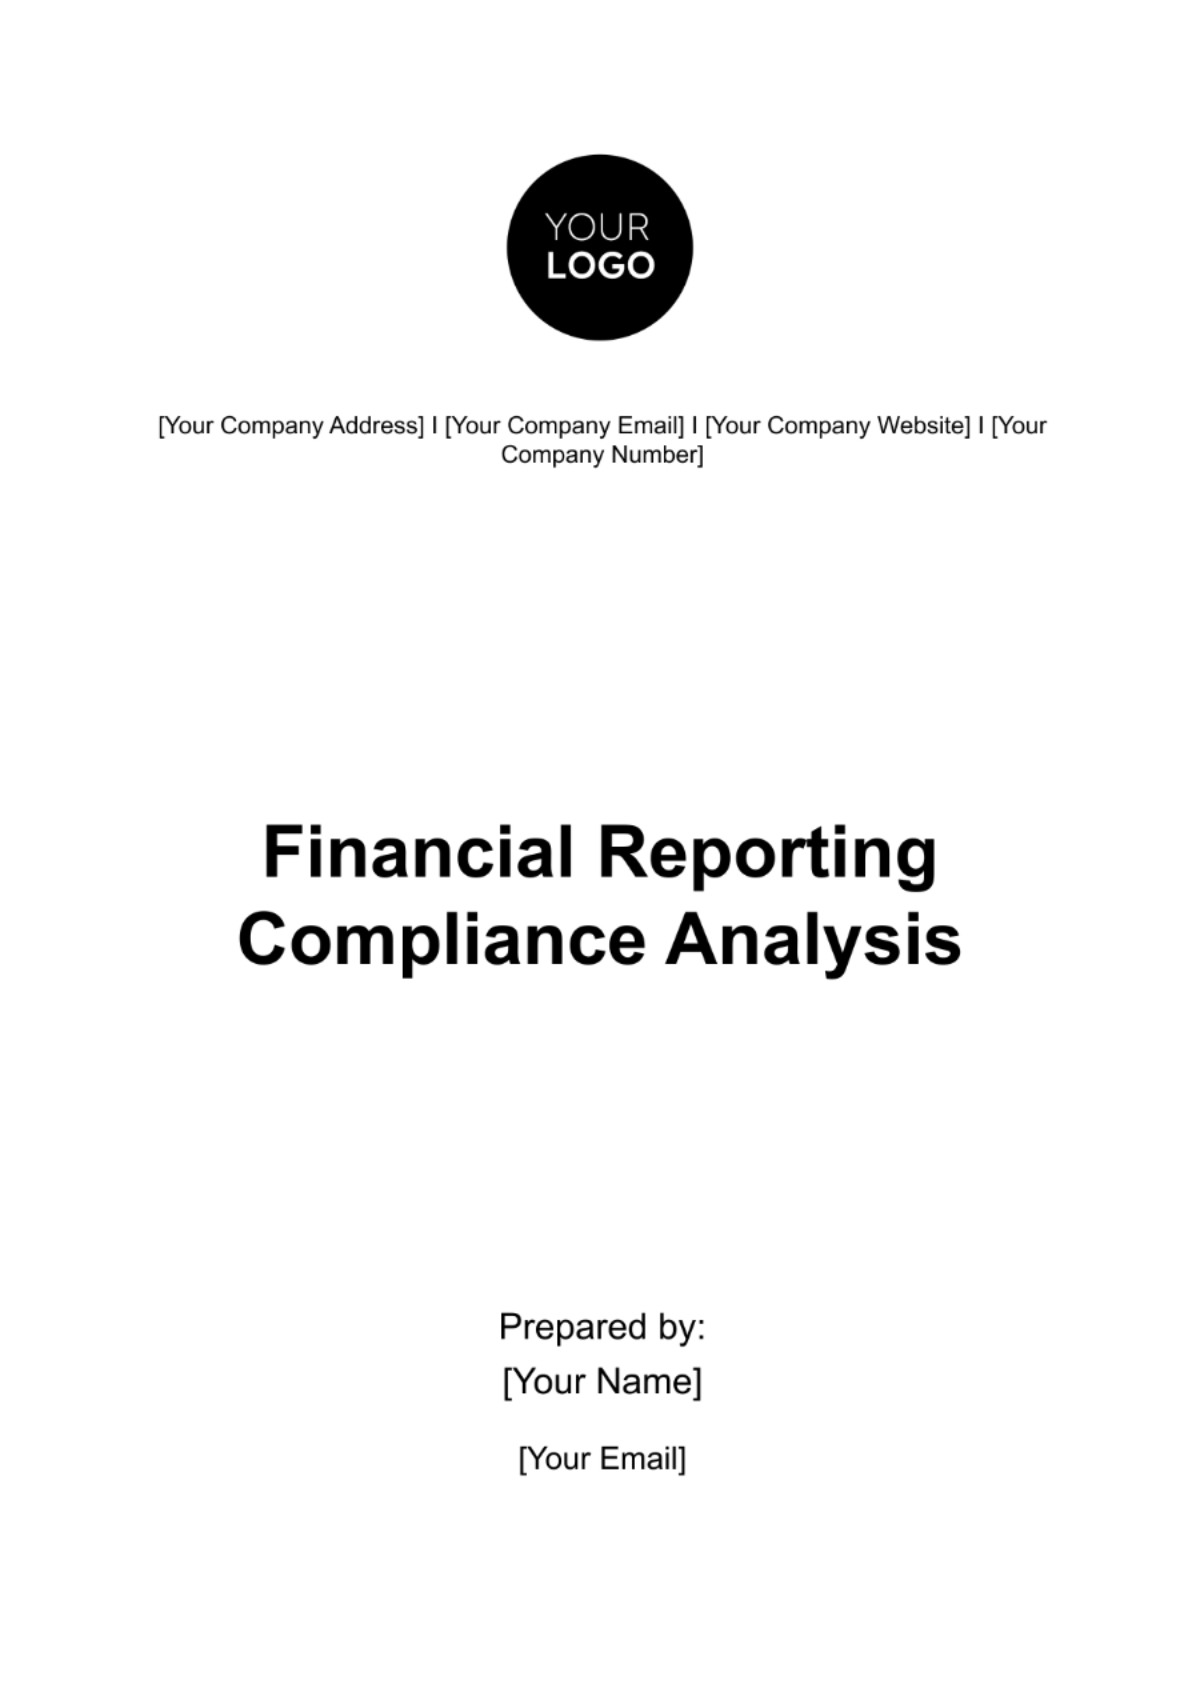 Free Financial Reporting Compliance Analysis Template